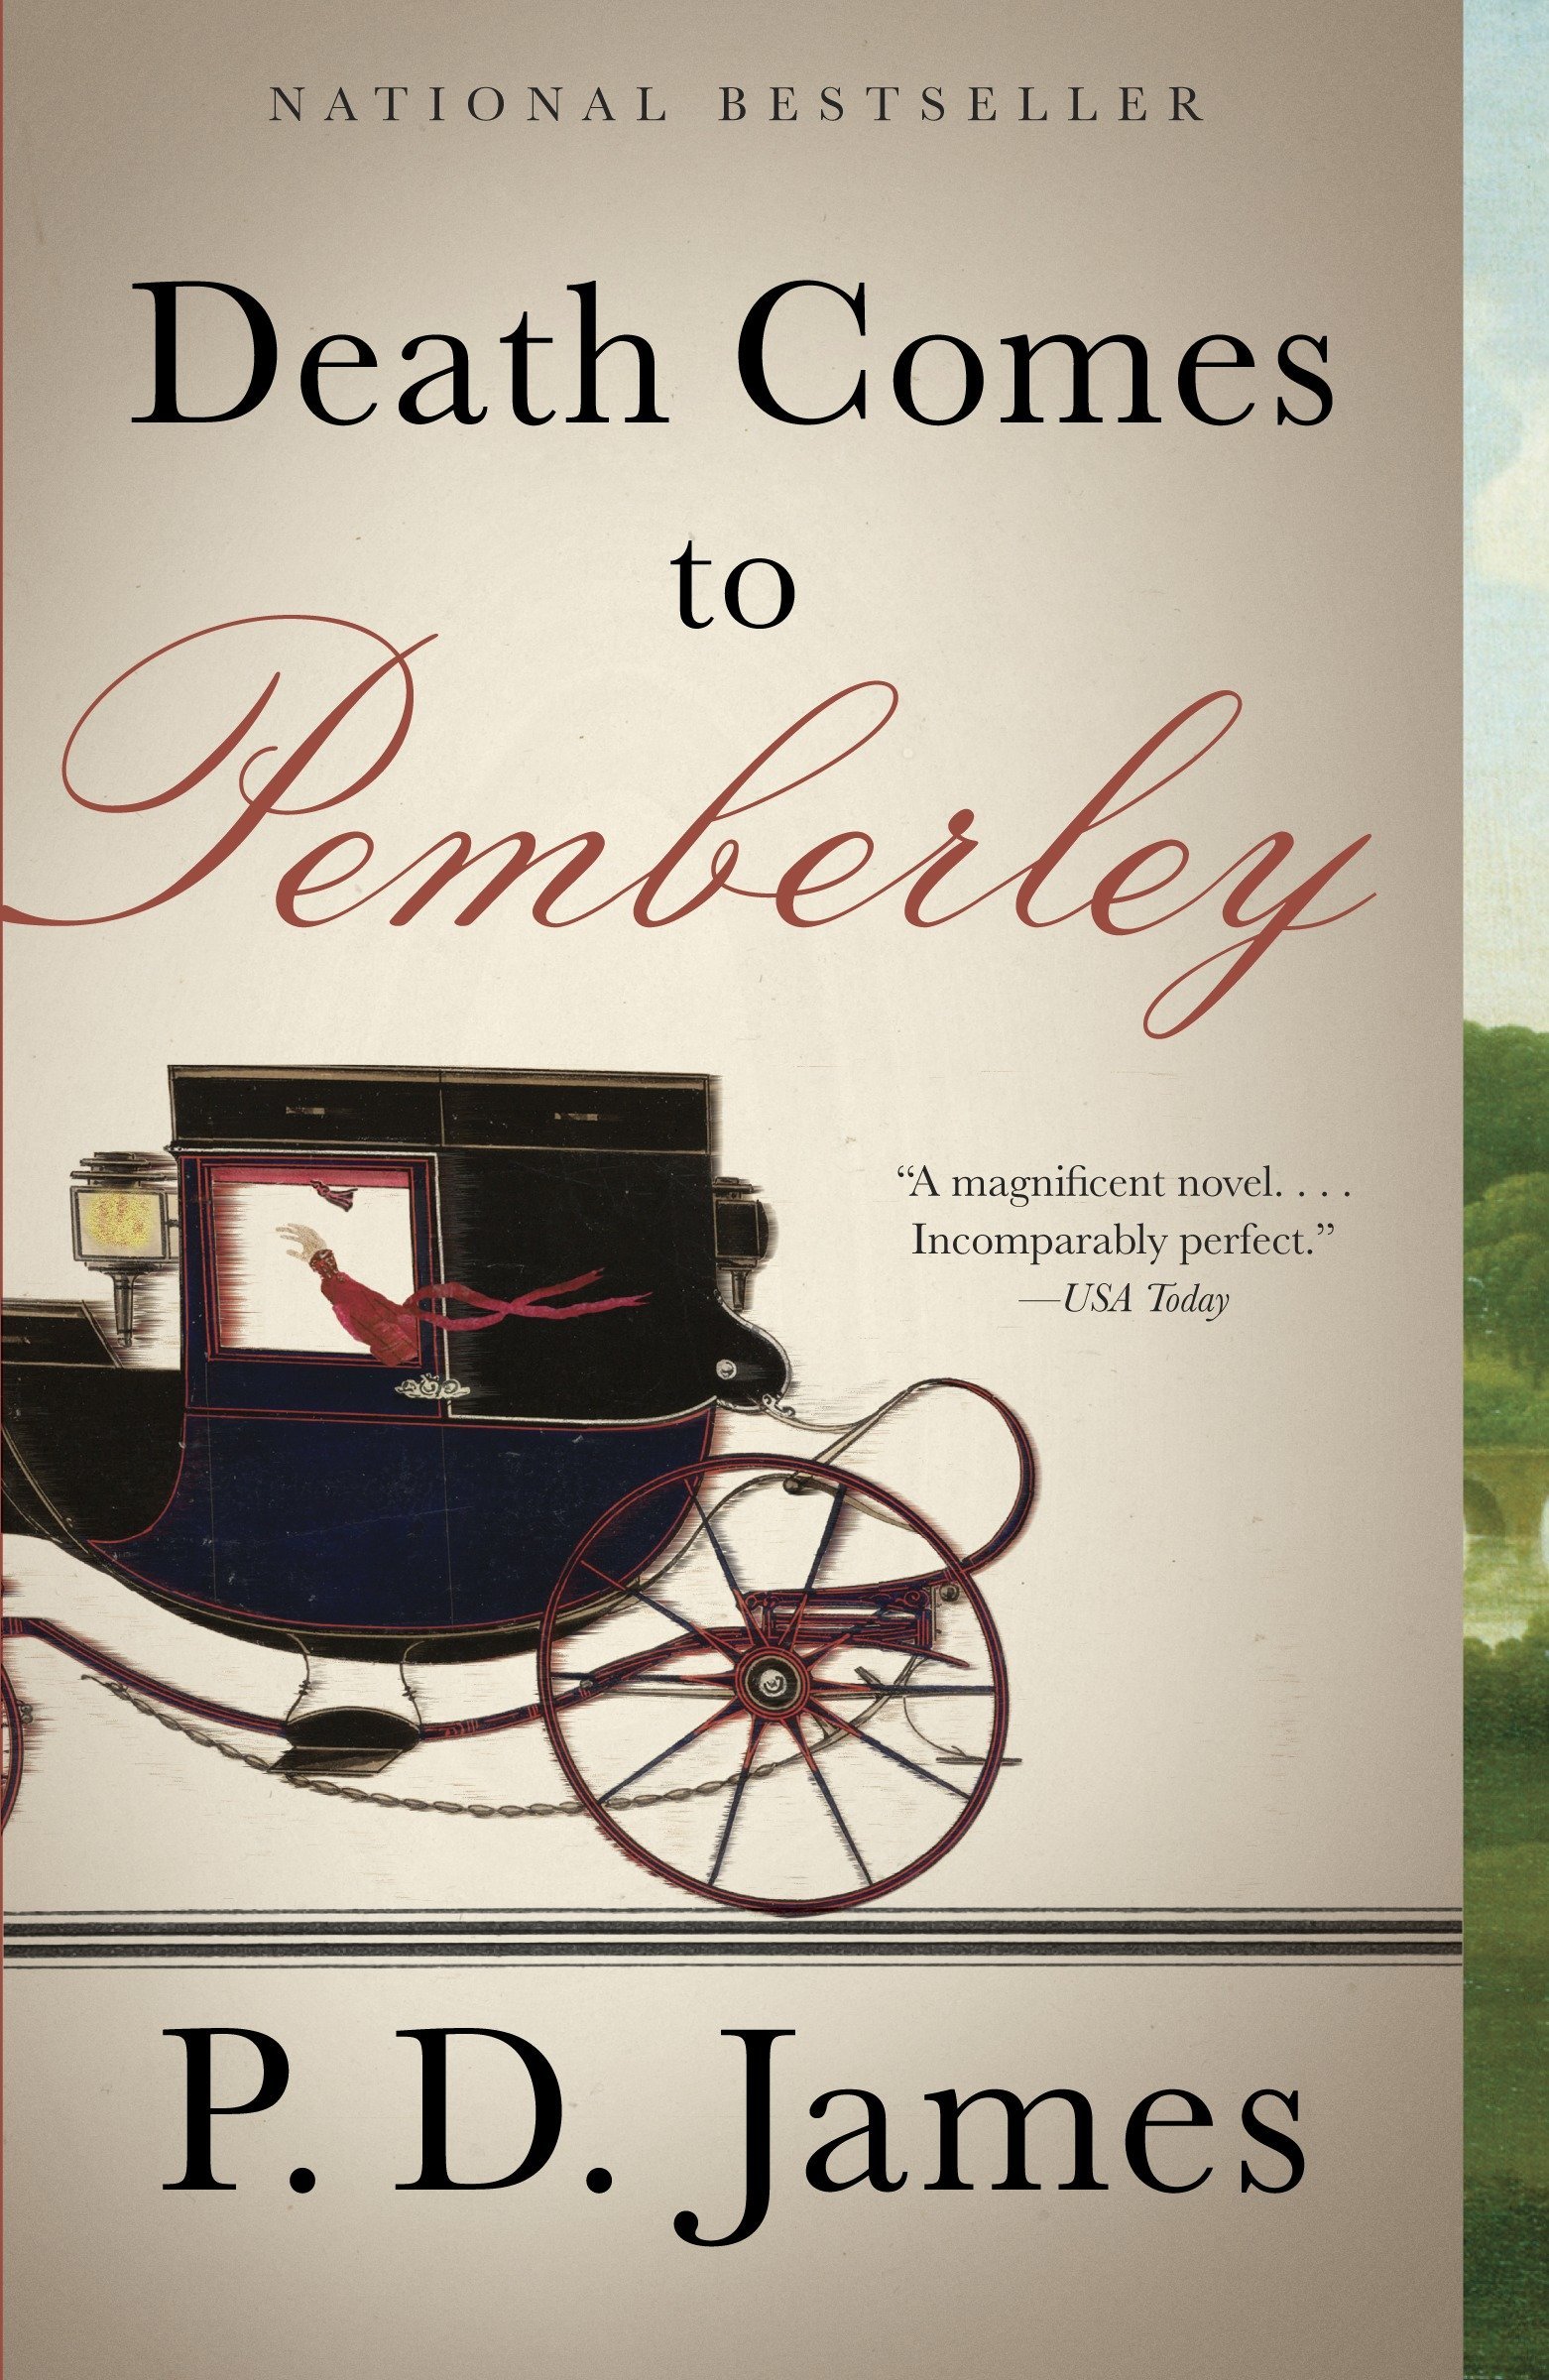 Cover of "Death Comes to Pemberley" by P.D. James